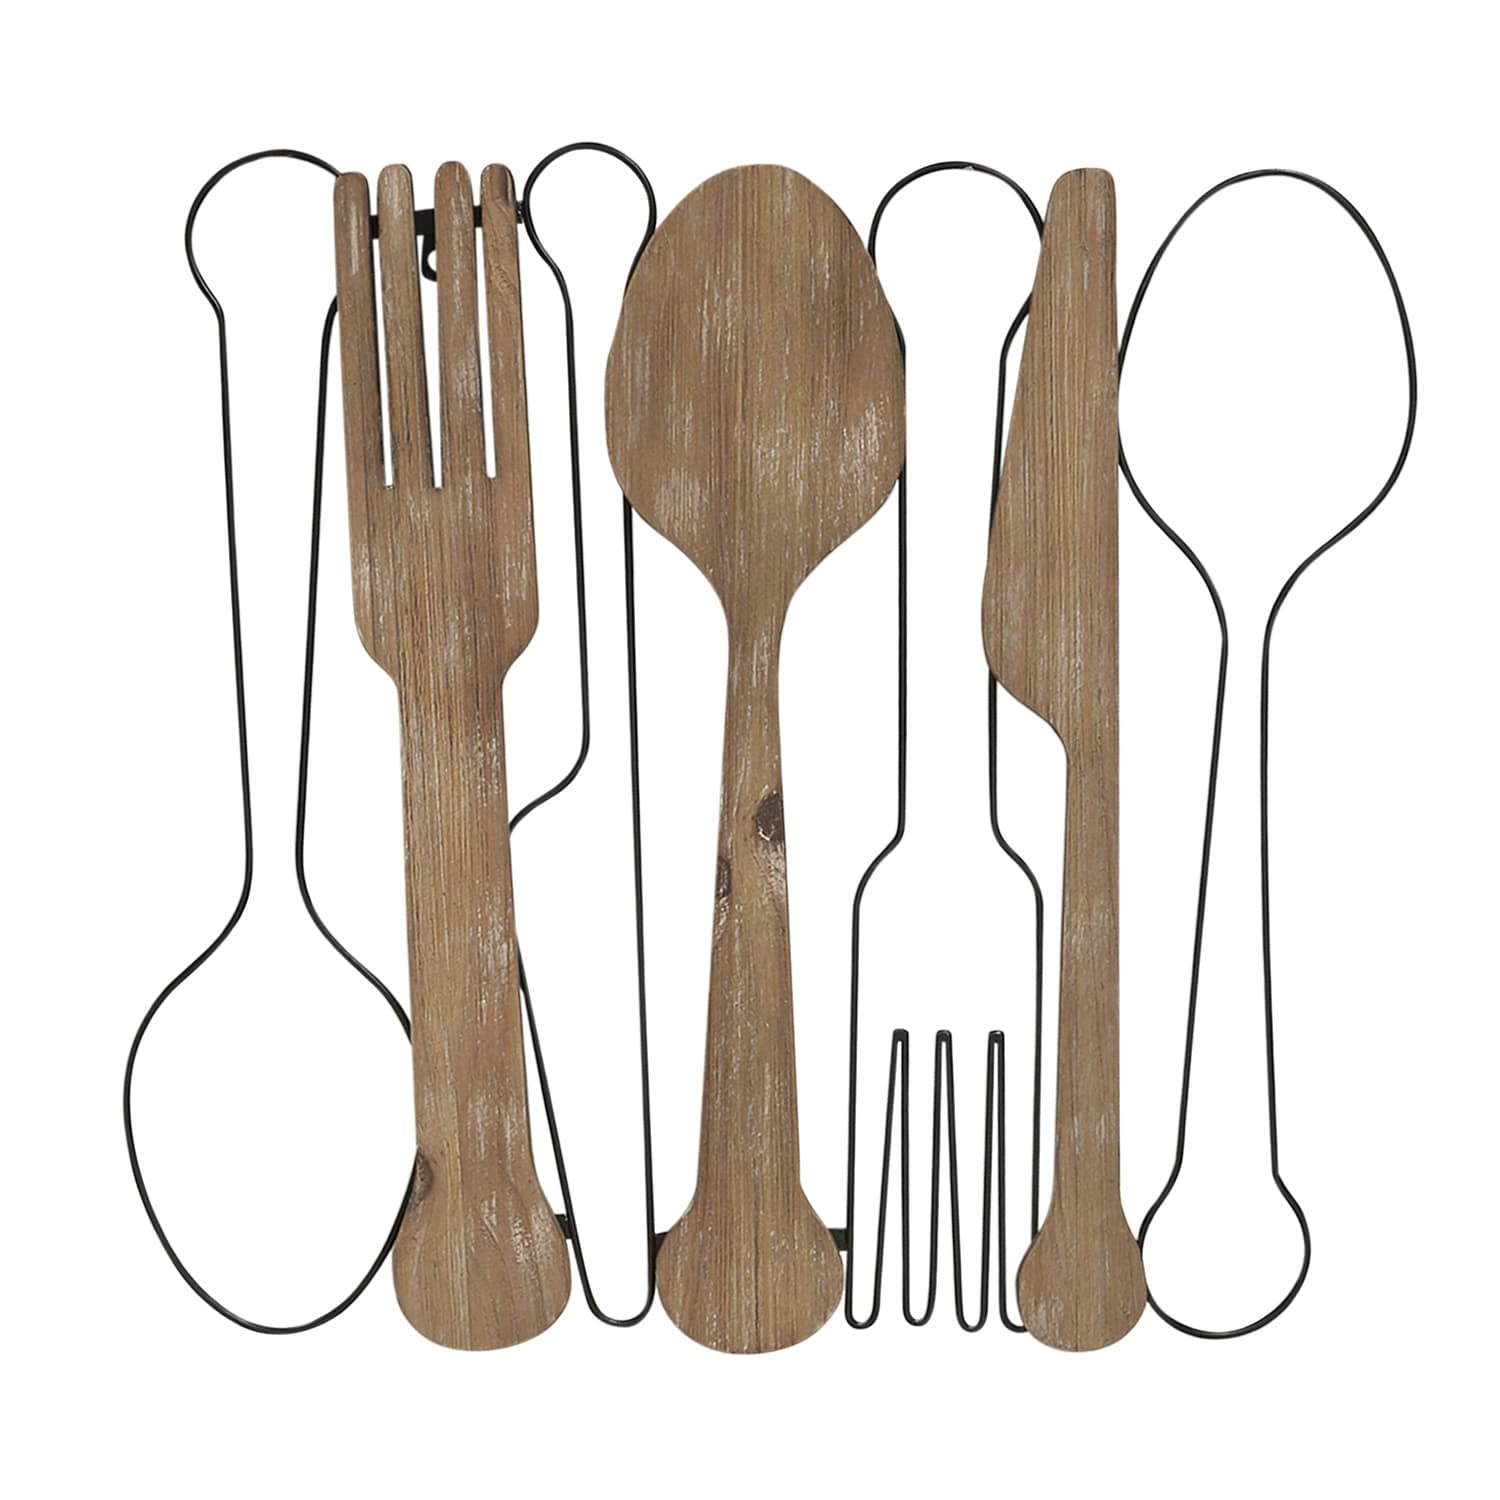 https://ak1.ostkcdn.com/images/products/is/images/direct/58a784dd5c17a889932afb6e0c0373709f22103e/Kitchen-Utensils-Wall-Decor-with-Metal-Outlines.jpg